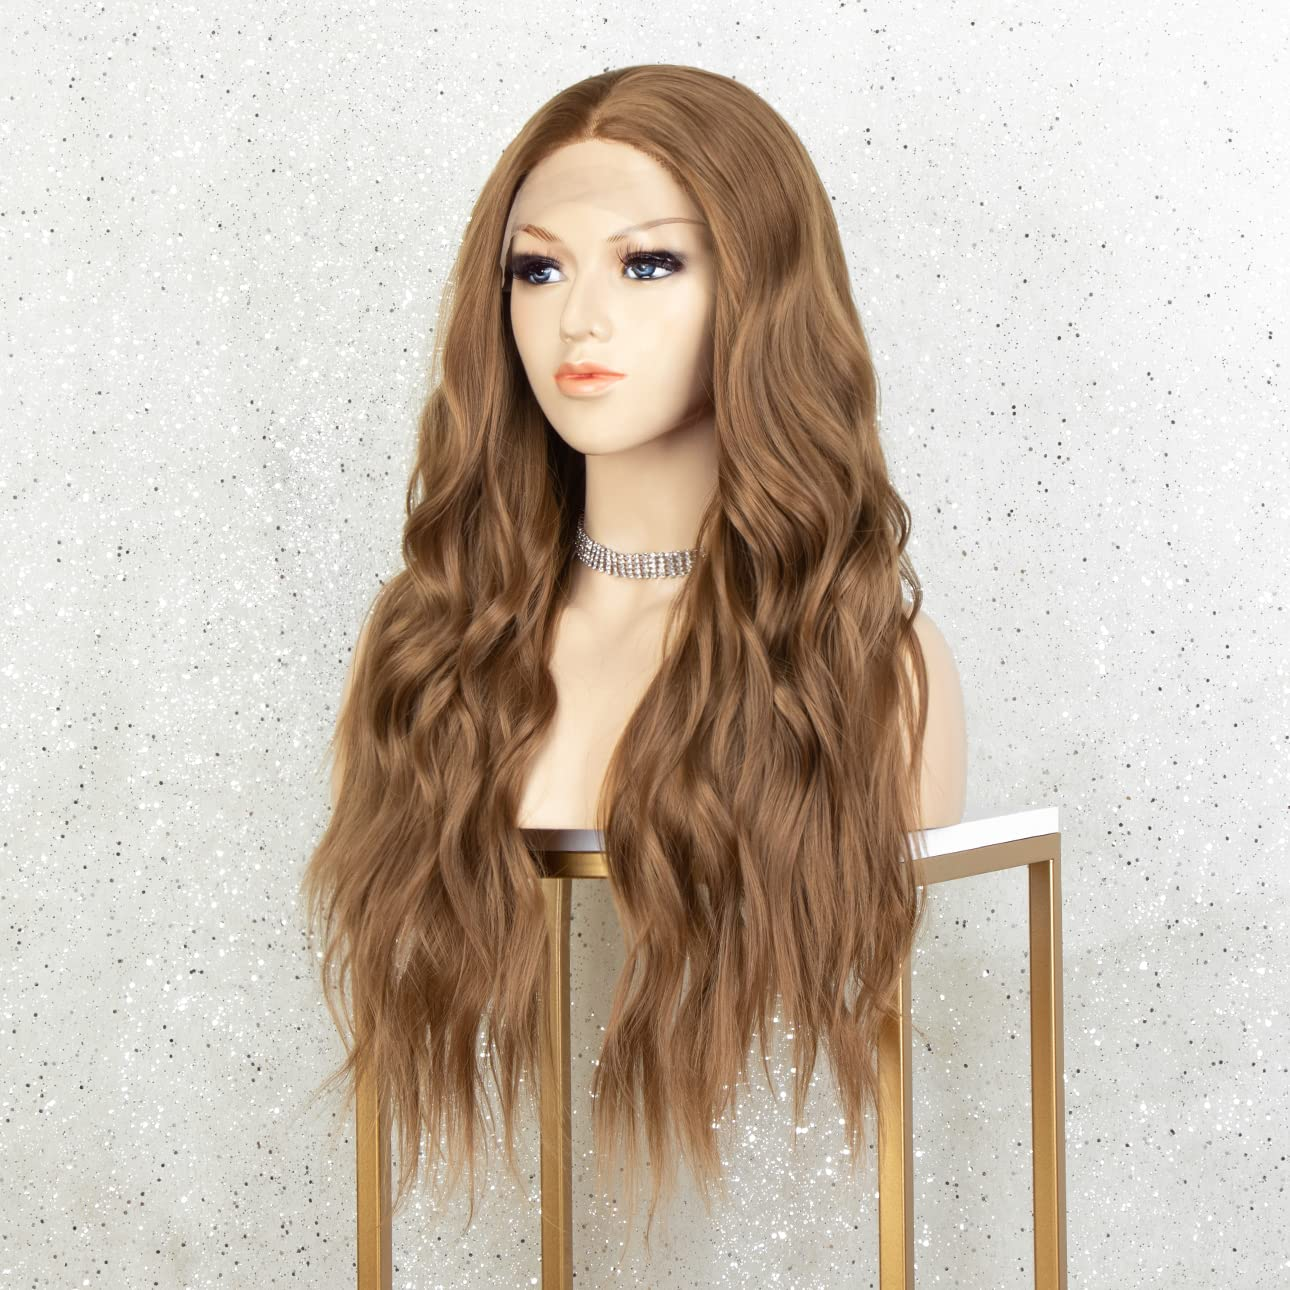  Golden Brown  22 inches Wavy Long Lace Front Wig